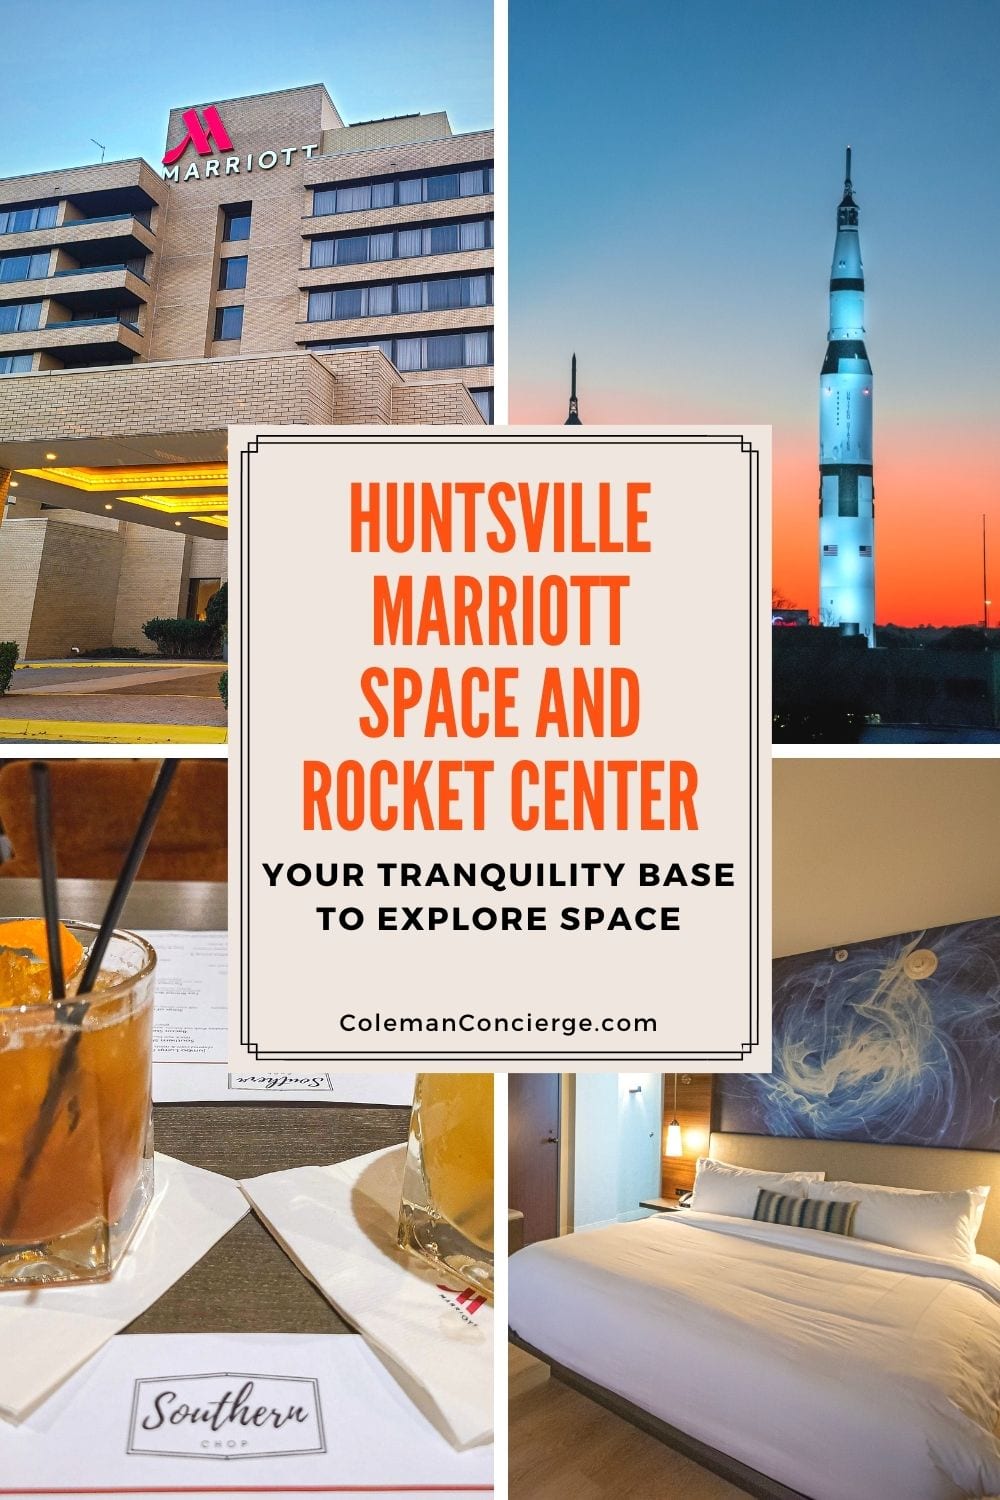 Images from Huntsville Marriott Space and Rocket Center